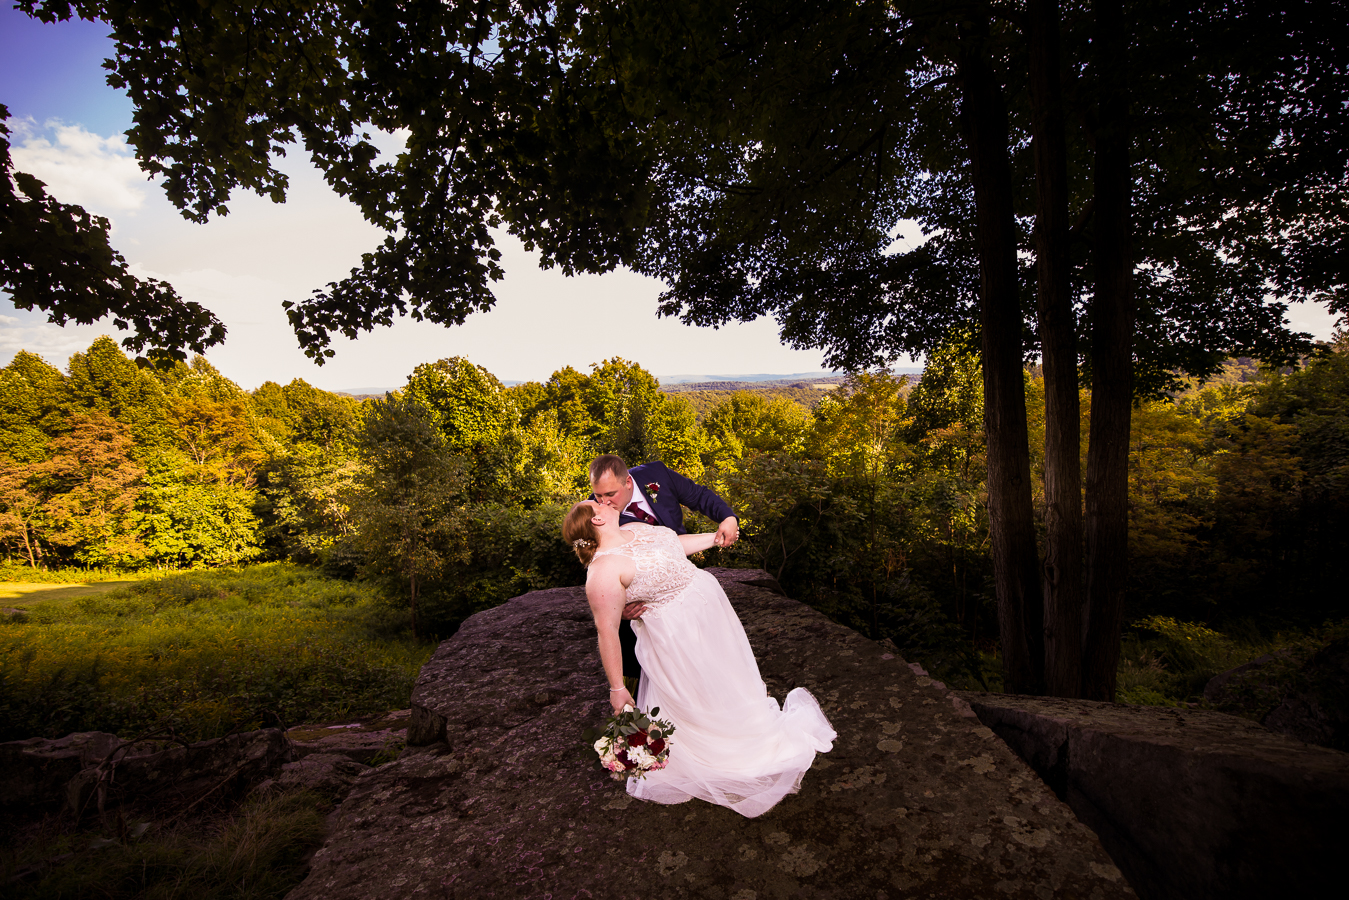 Oak Lodge Wedding Photographer, rhinehart photography, captures this stunning, unique image of the bride and groom as they stand on the ledge kissing surrounded by the trees and mountain views during their romantic portrait session